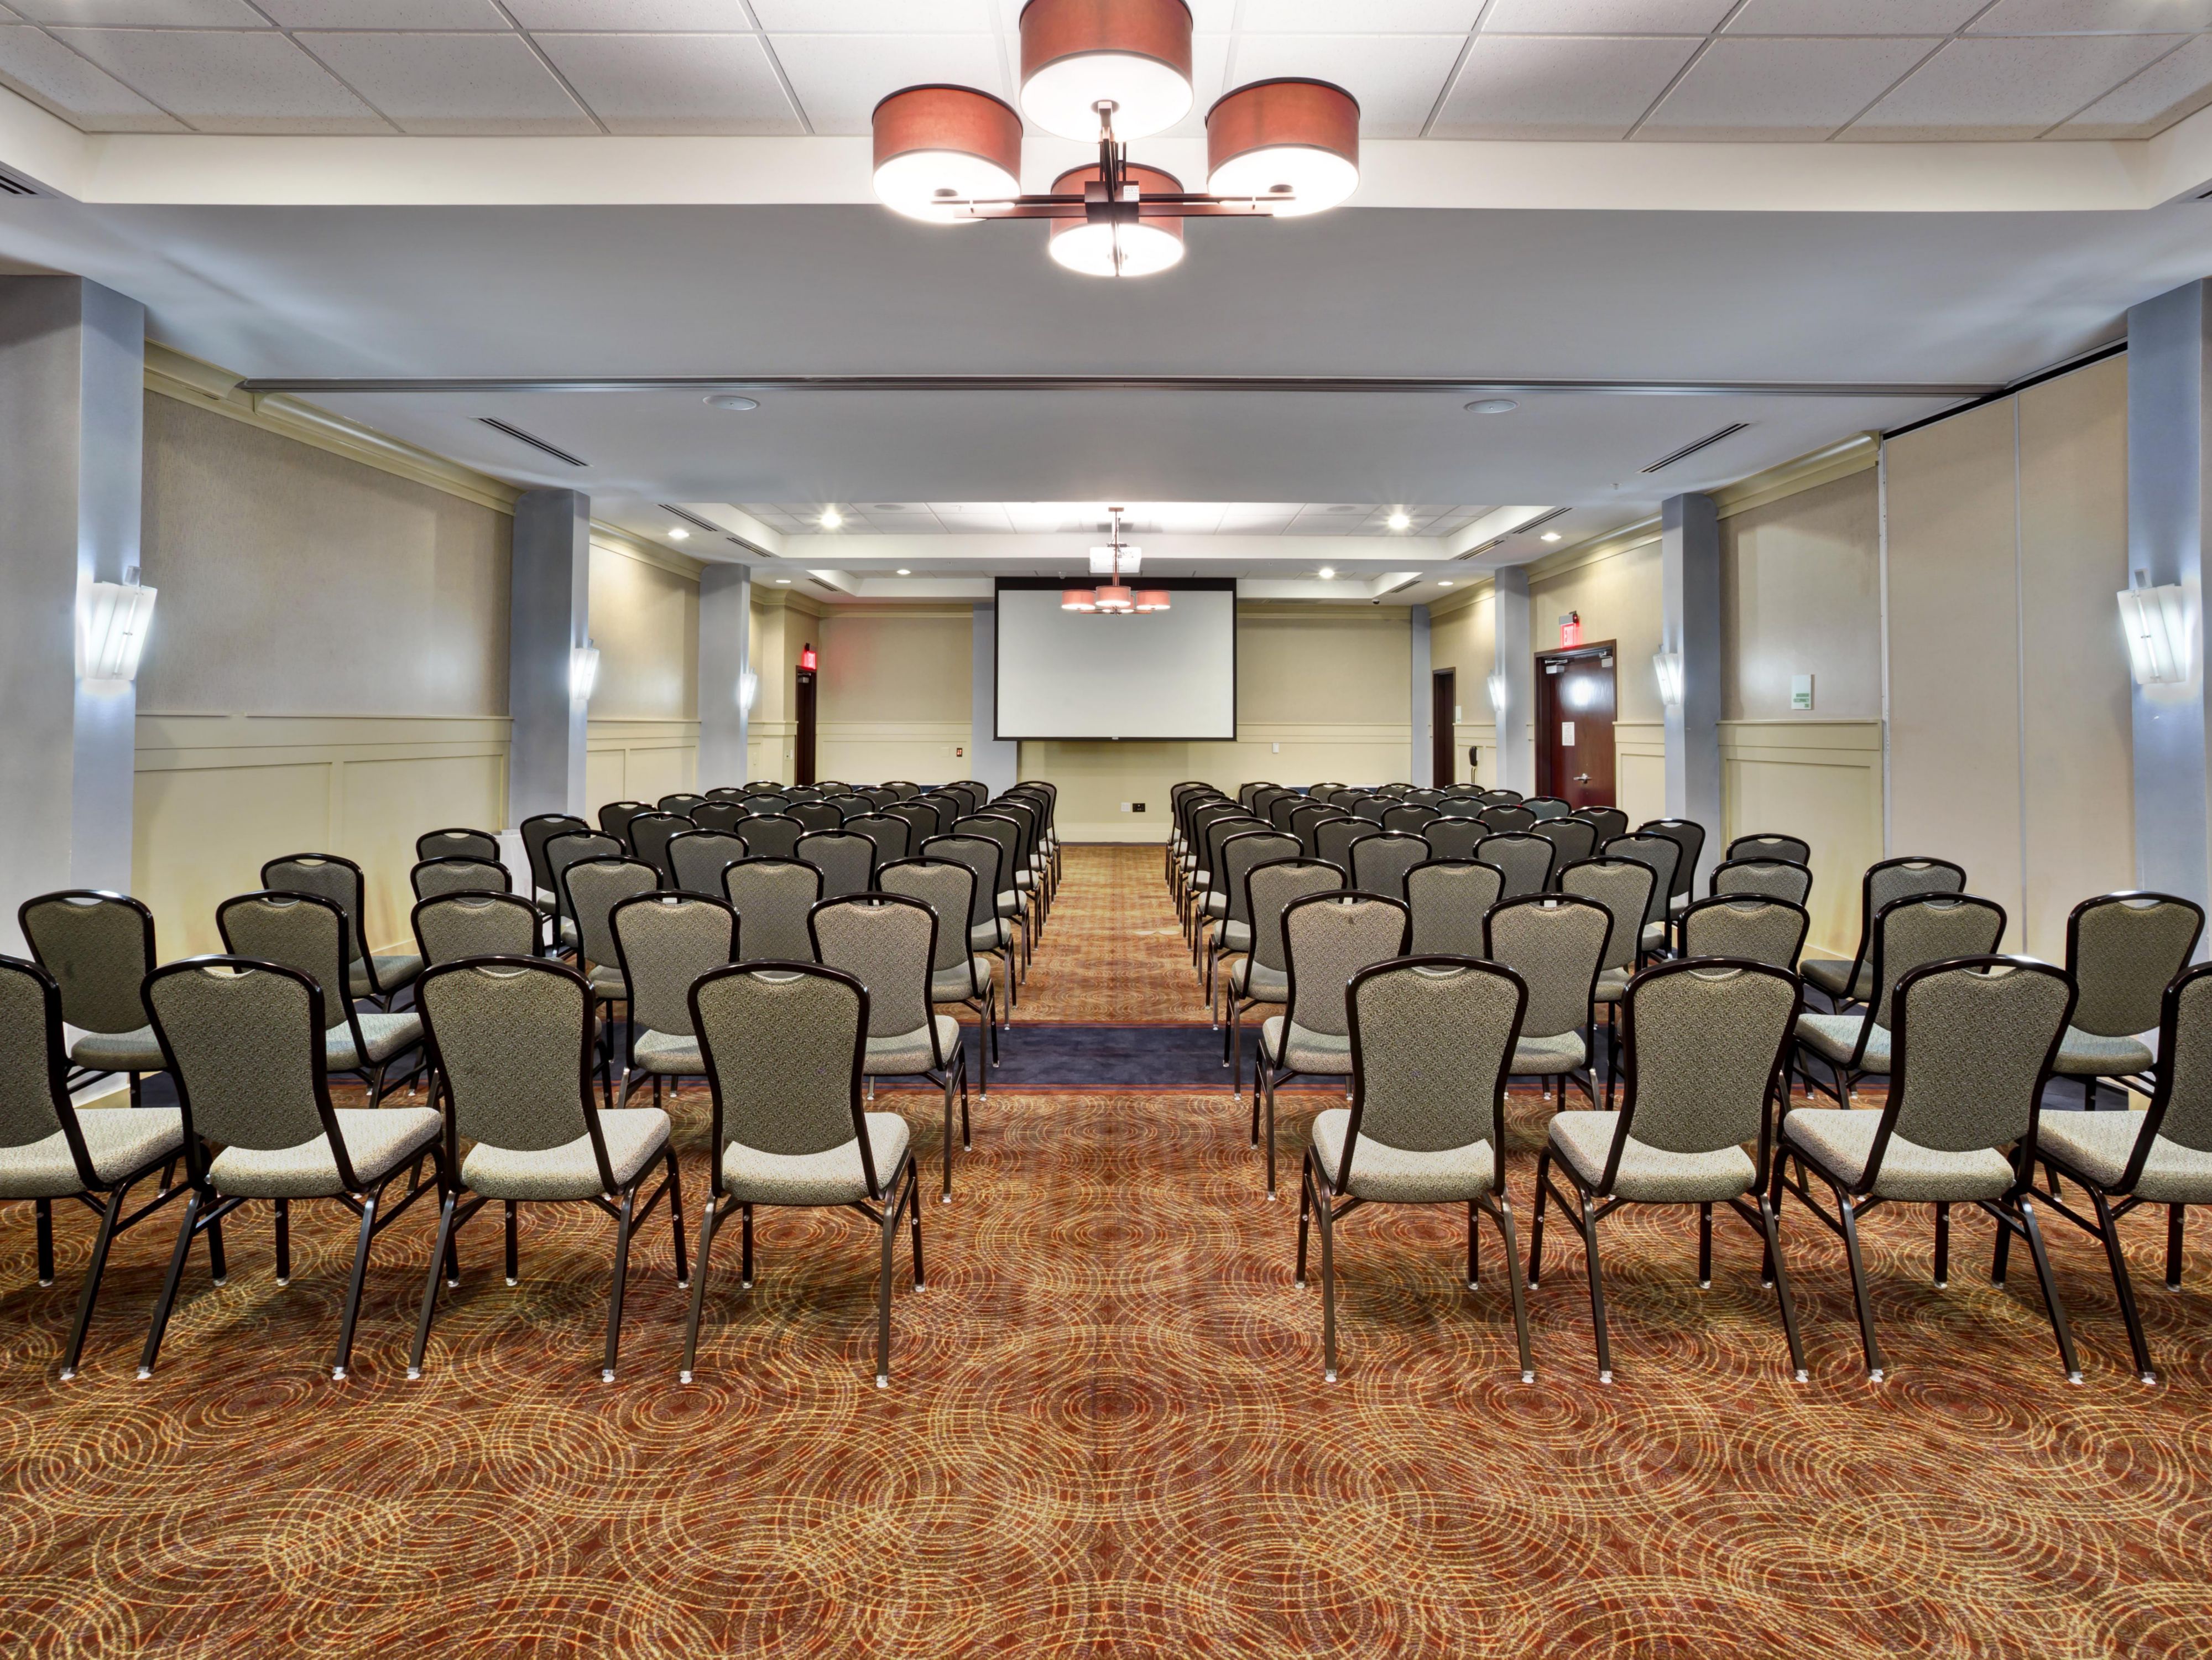 Host your next business meeting or conference at our Detroit airport hotel. We have 1,690 square feet of meeting space, catering services, and 143 guest rooms for your event. Our dedicated event specialists will help you plan every detail. 